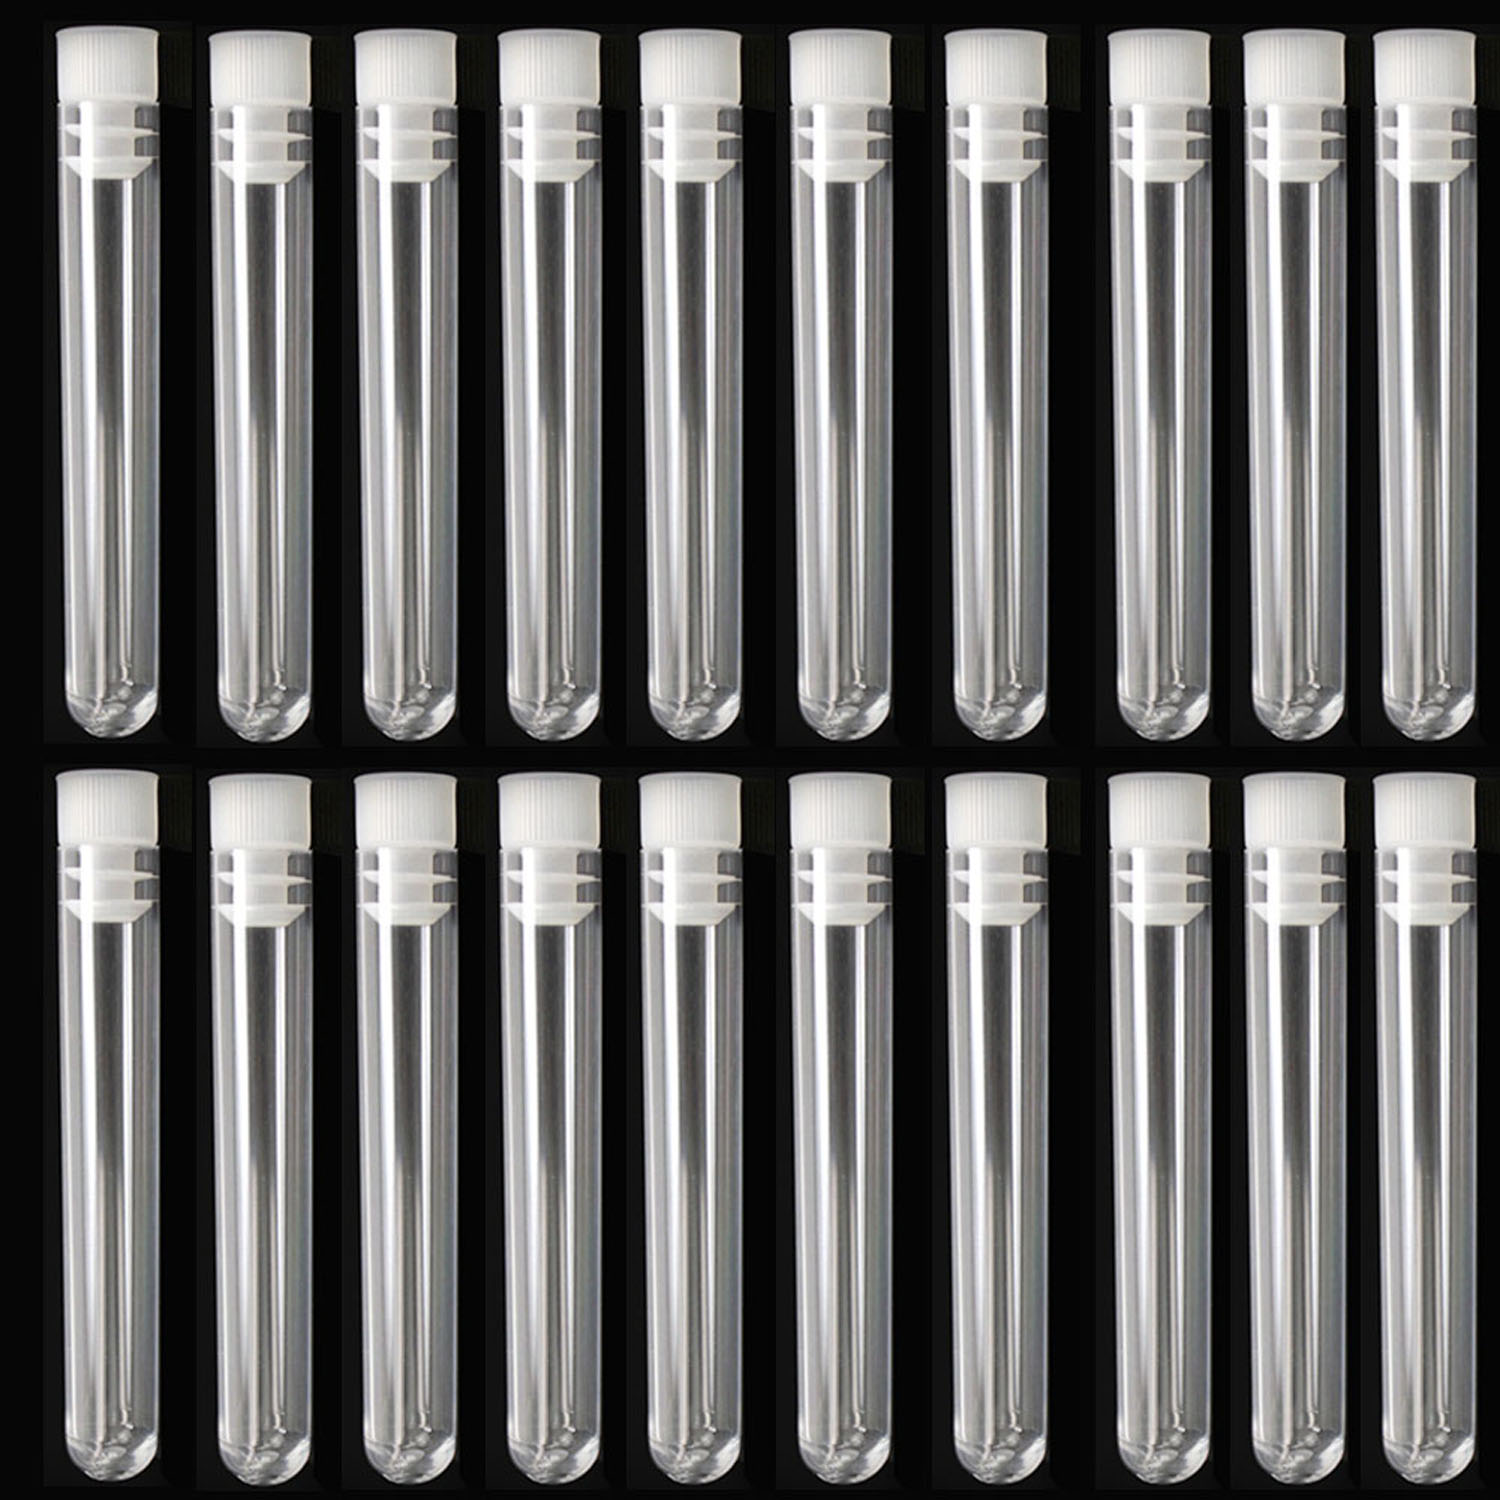 25pcs/Lot Clear Plastic Empty Test Tube with White Caps Stoppers U-Shaped Bottom Long Transparent Container Lab Supplies 7.5*1.2